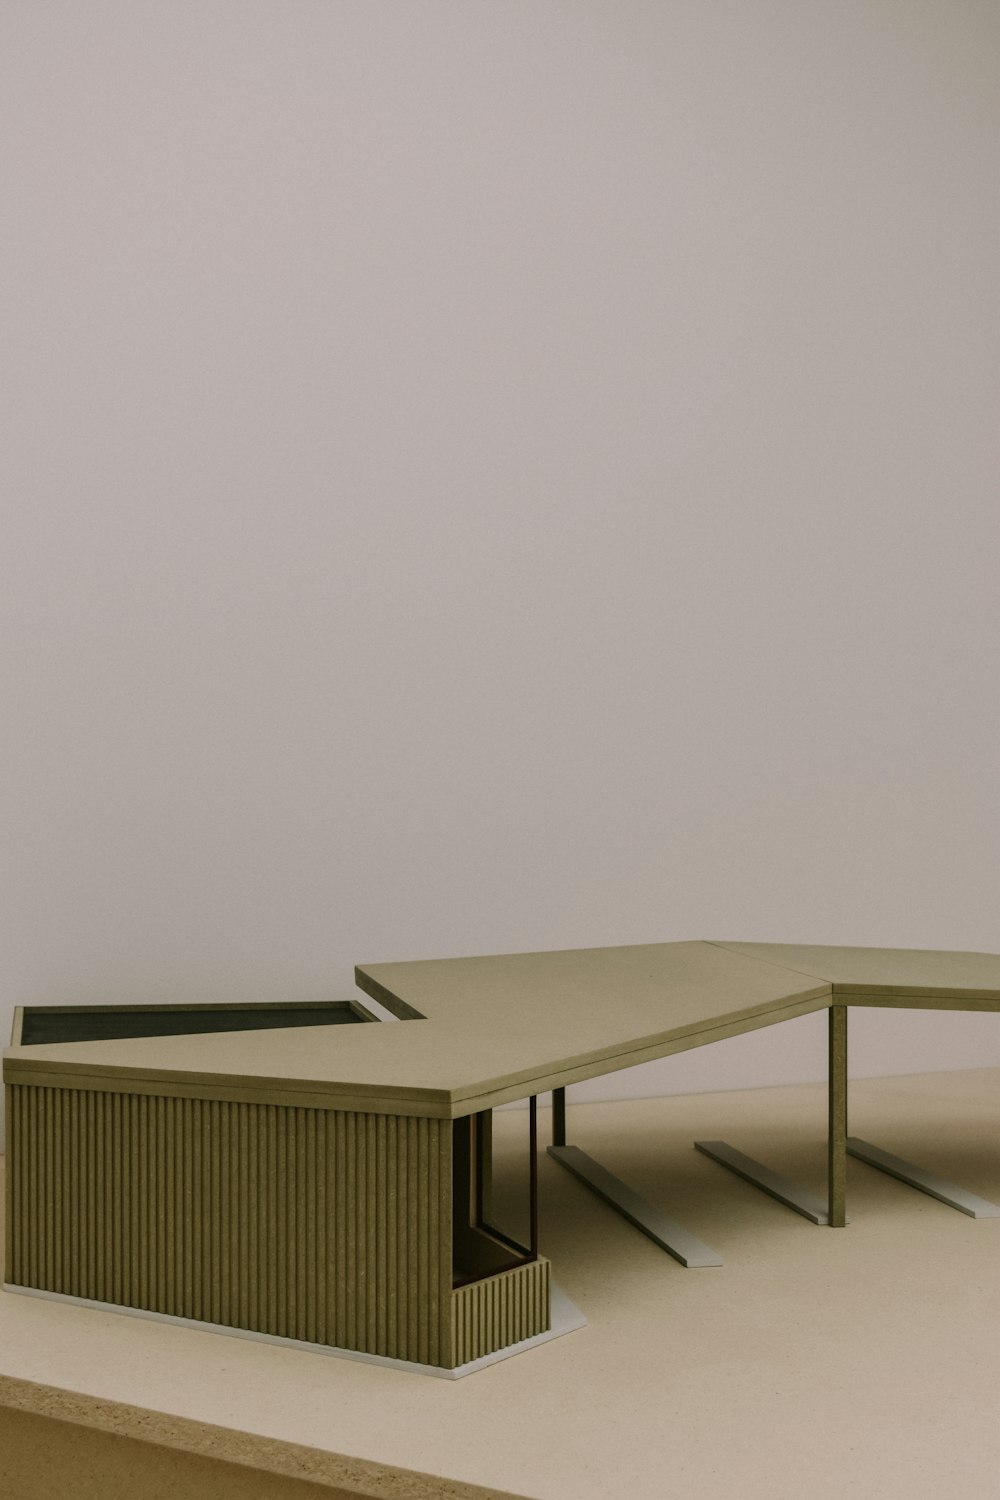 a model of a table and a bench in a room